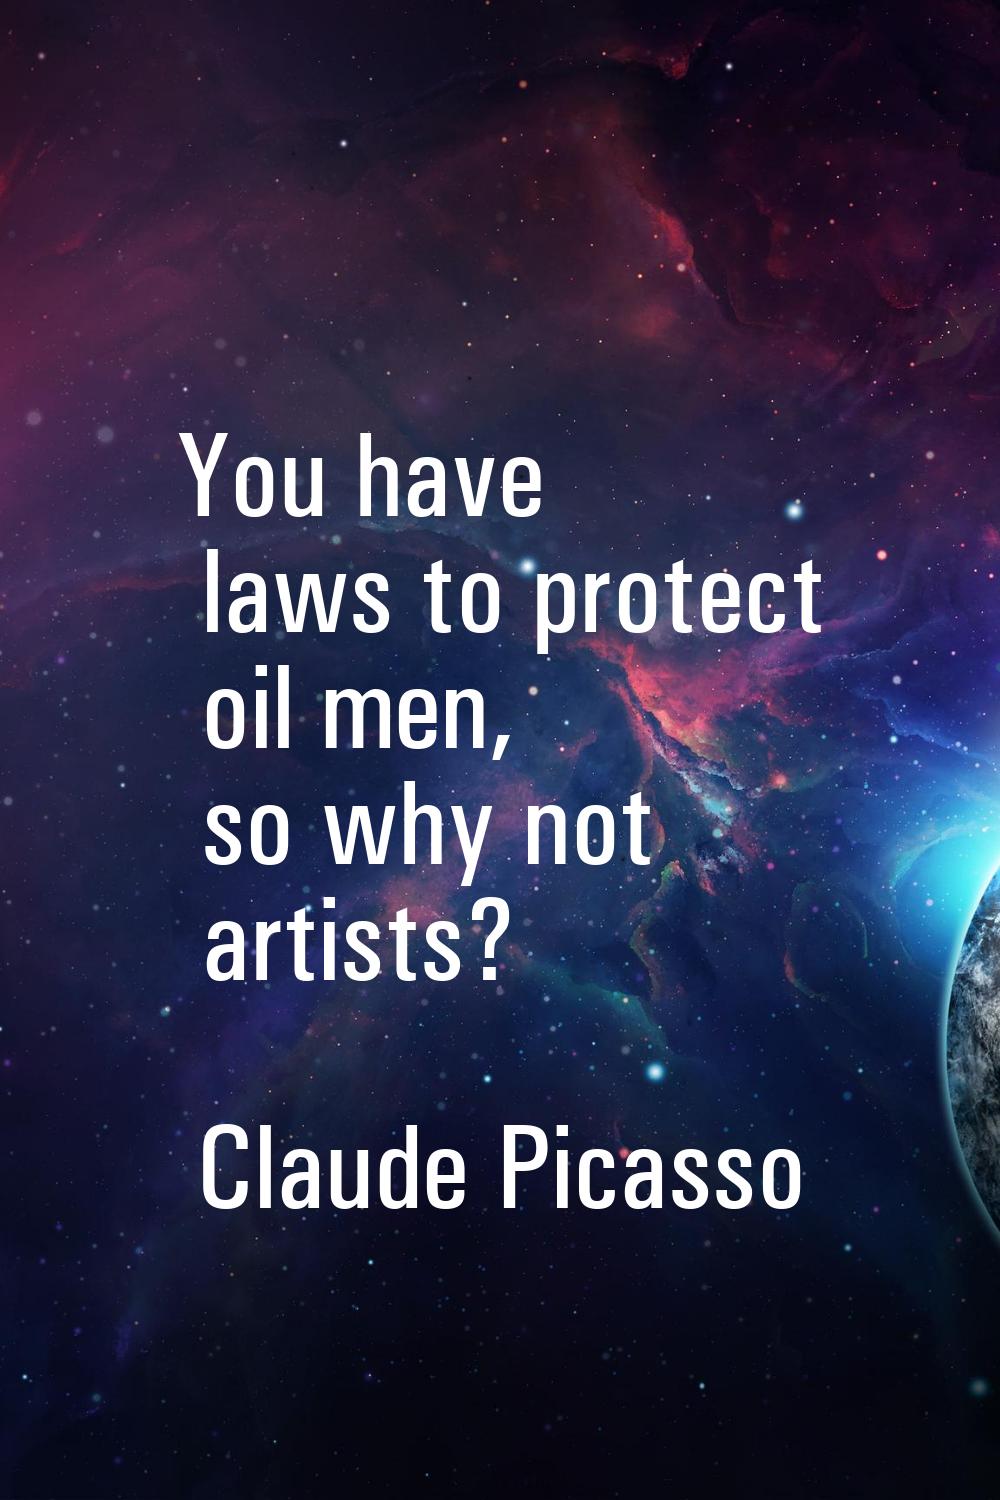 You have laws to protect oil men, so why not artists?